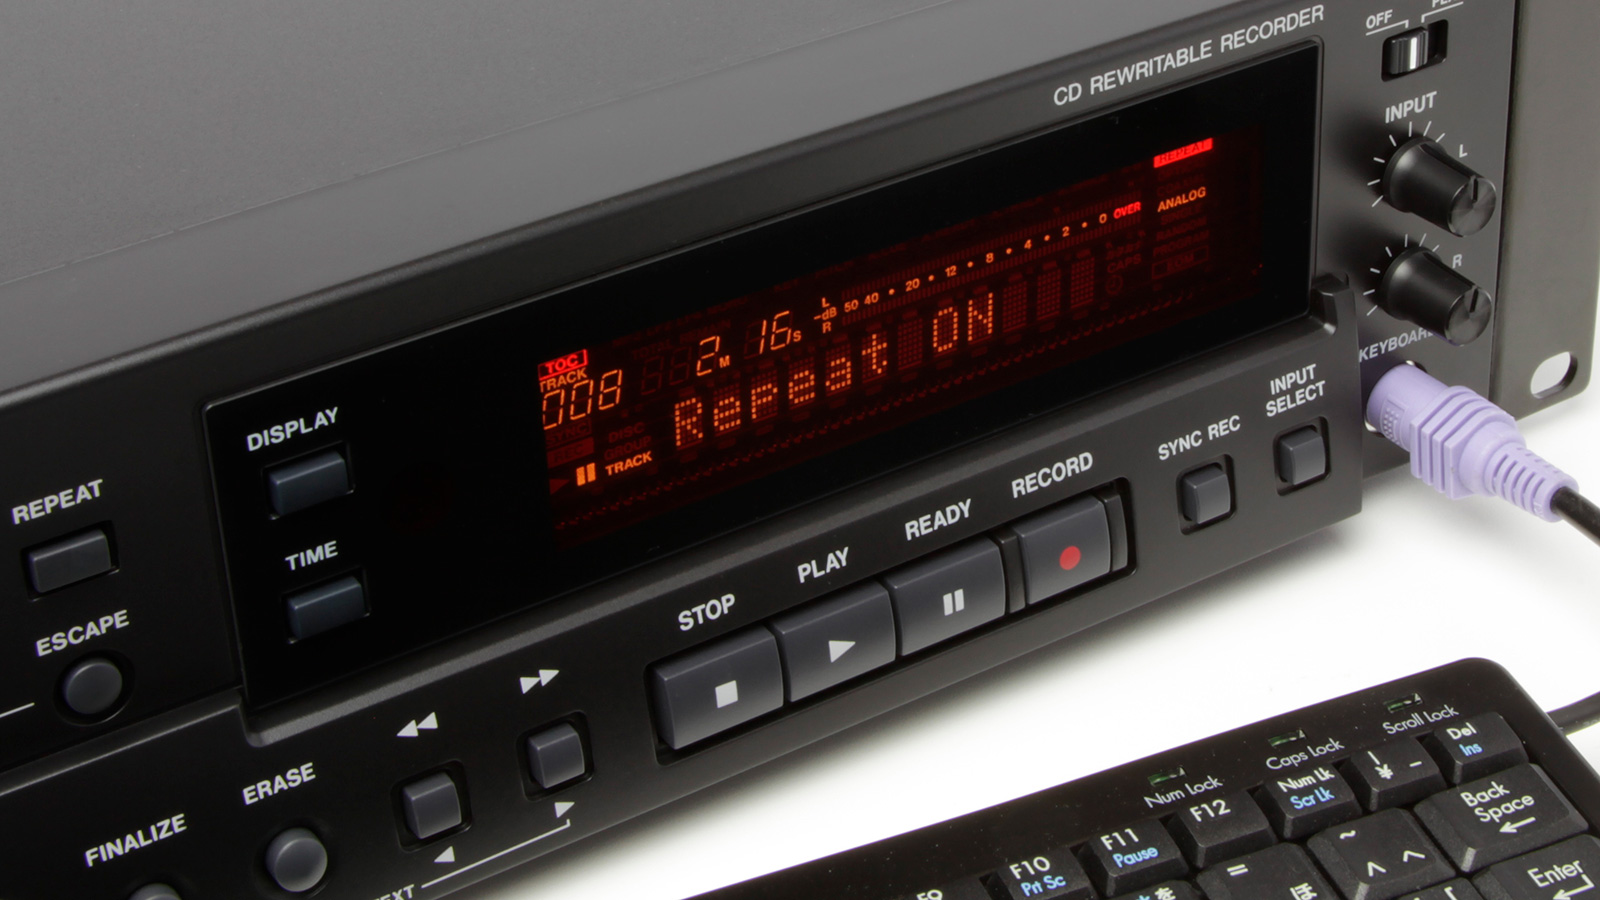 CD-RW900MKII | FEATURES | TASCAM - United States